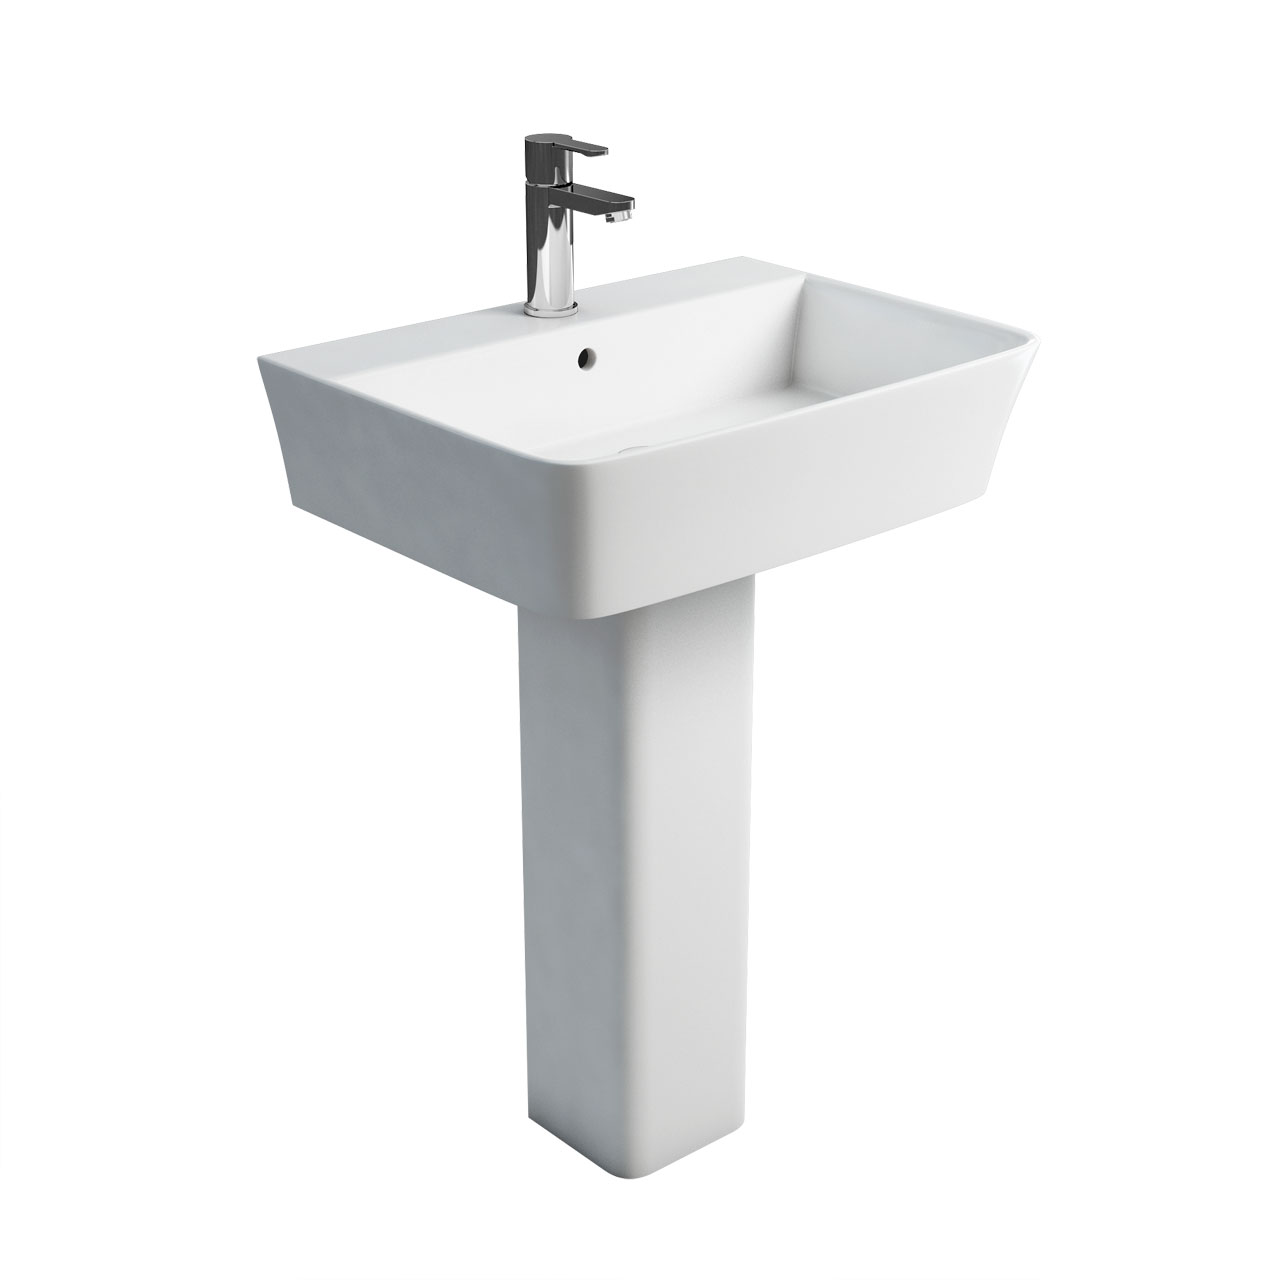 Fine S40 600 basin and square fronted pedestal